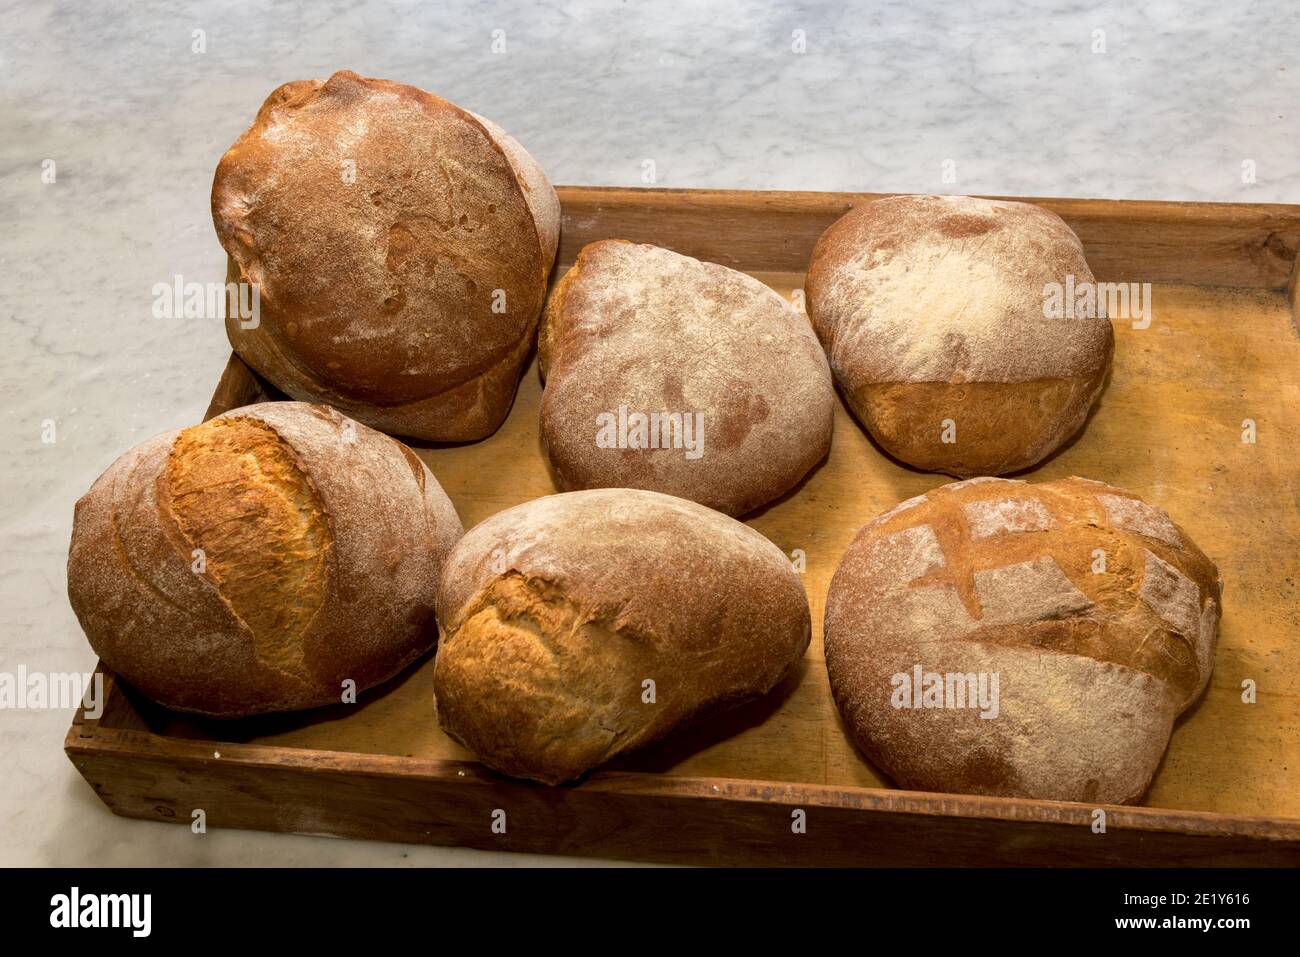 rustic country bread, six well-cooked loaves in a wooden tray Stock Photo